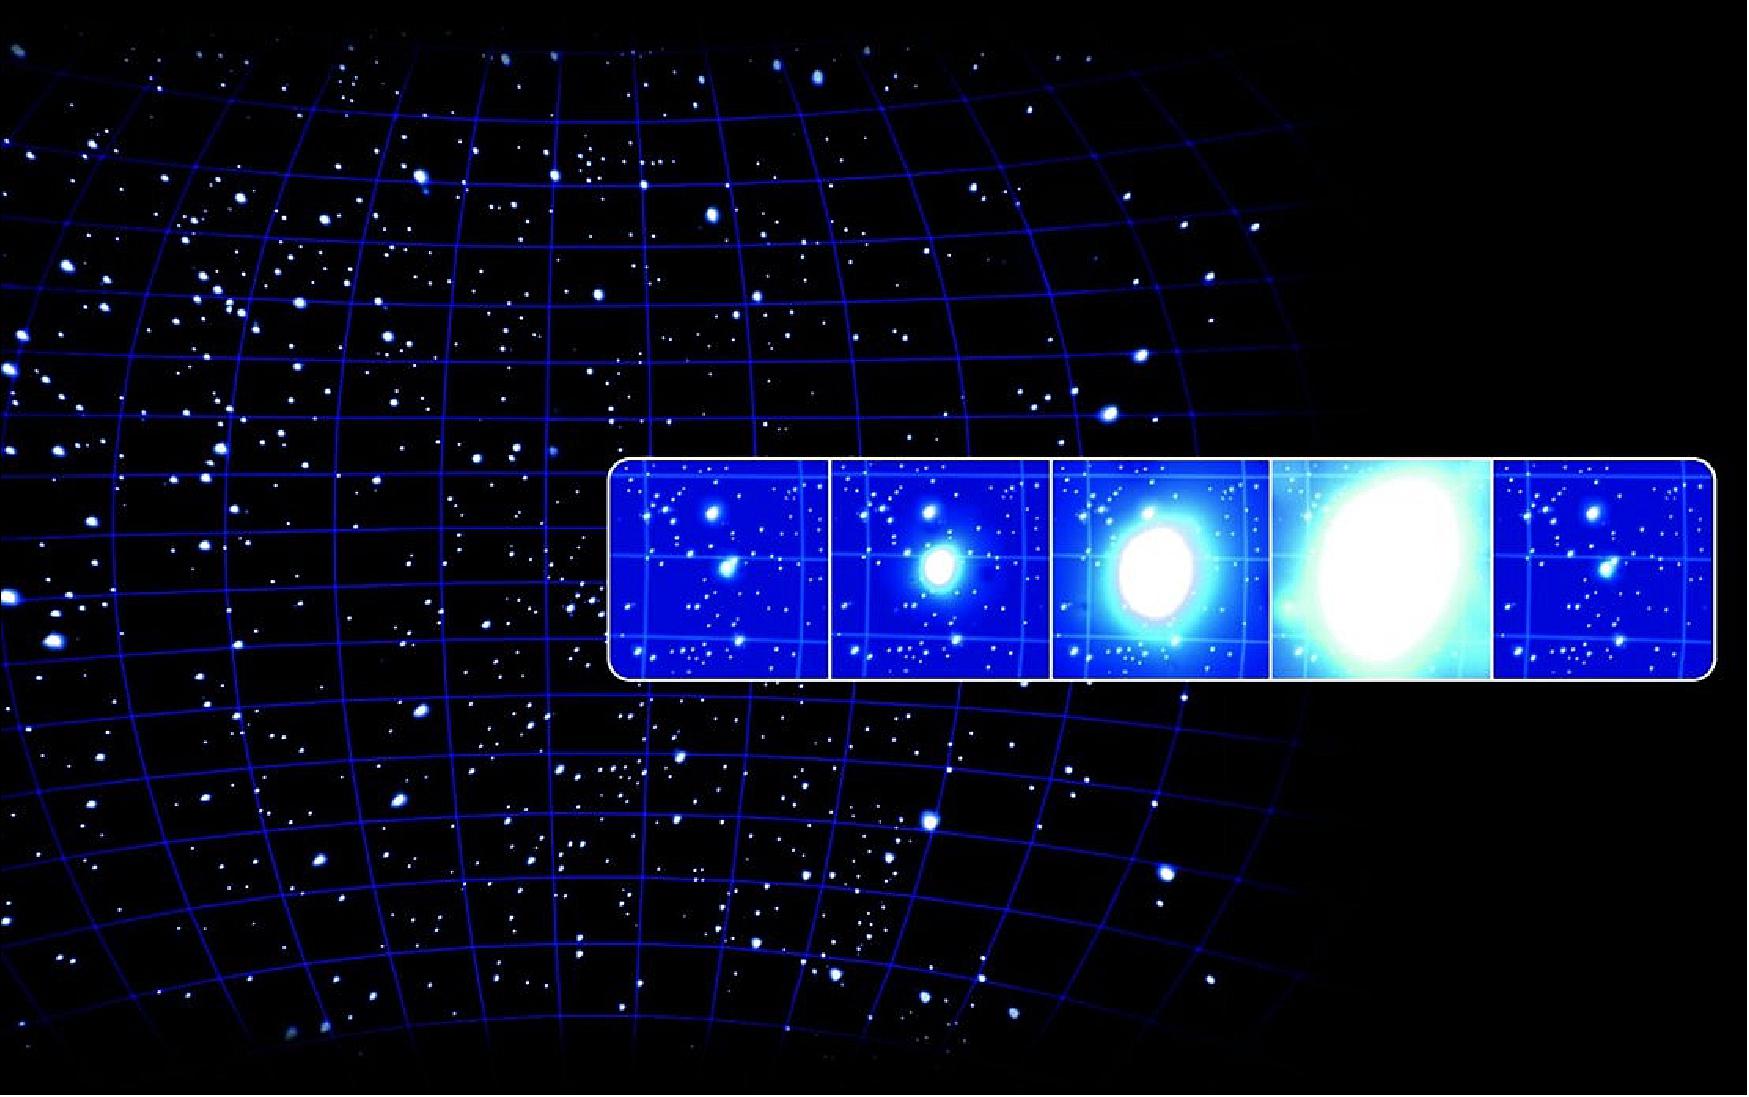 Figure 43: A gamma-ray burst. This artist's impression illustrates how a gamma-ray burst can flare dramatically over a short time period (gamma ray bursts usually last between a hundredth of a second to a hundred seconds). The bursts can occur as often as several times a day. There is no way to predict when or where they will next occur. ESA missions such as XMM-Newton, INTEGRAL and Ulysses study these mysterious, powerful bursts (image credit: ESA, illustration by AOES Medialab)